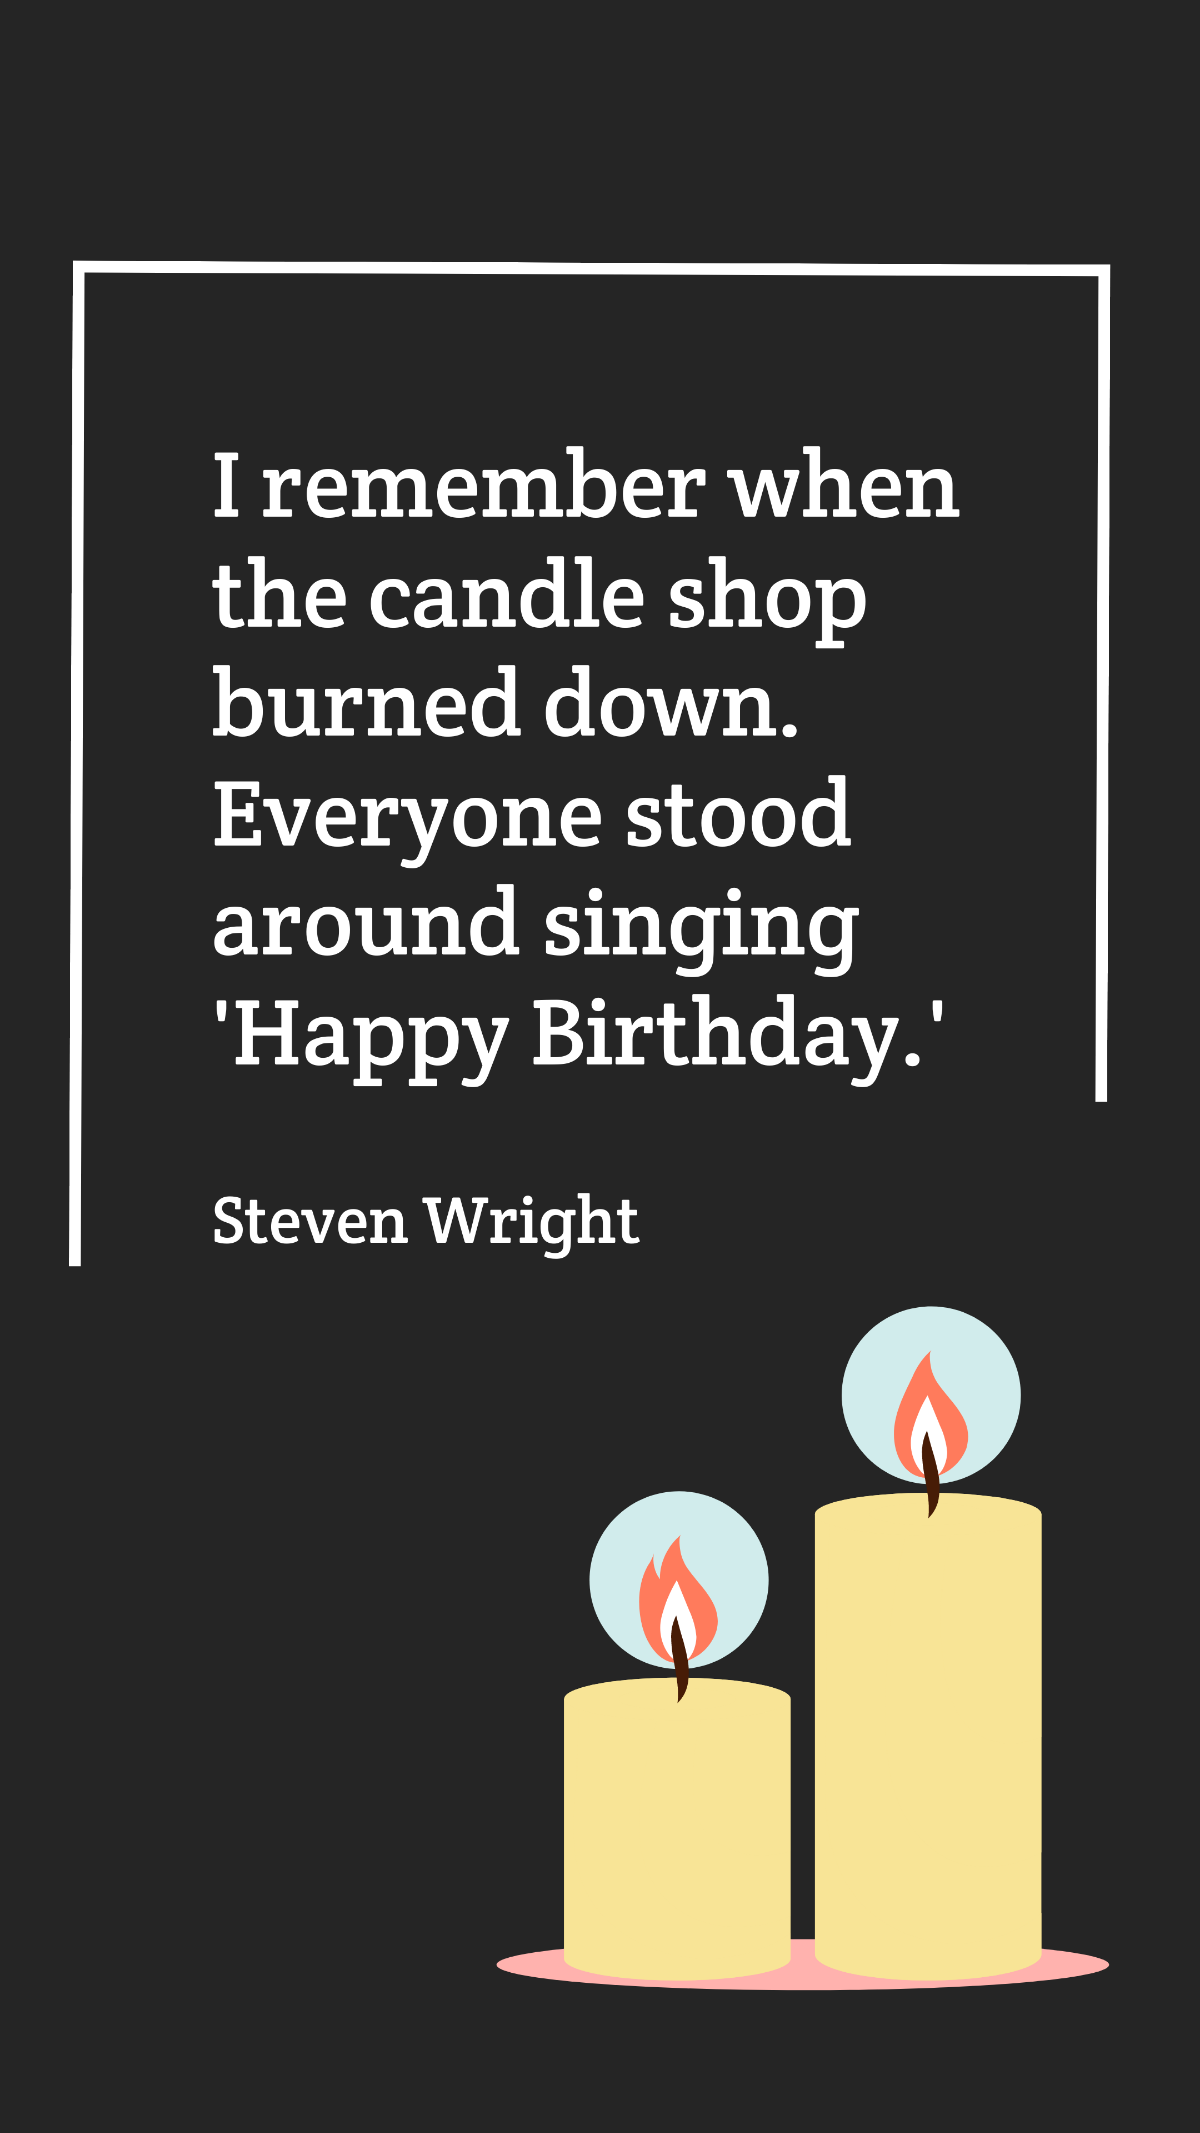 Steven Wright - I remember when the candle shop burned down. Everyone stood around singing 'Happy Birthday.'